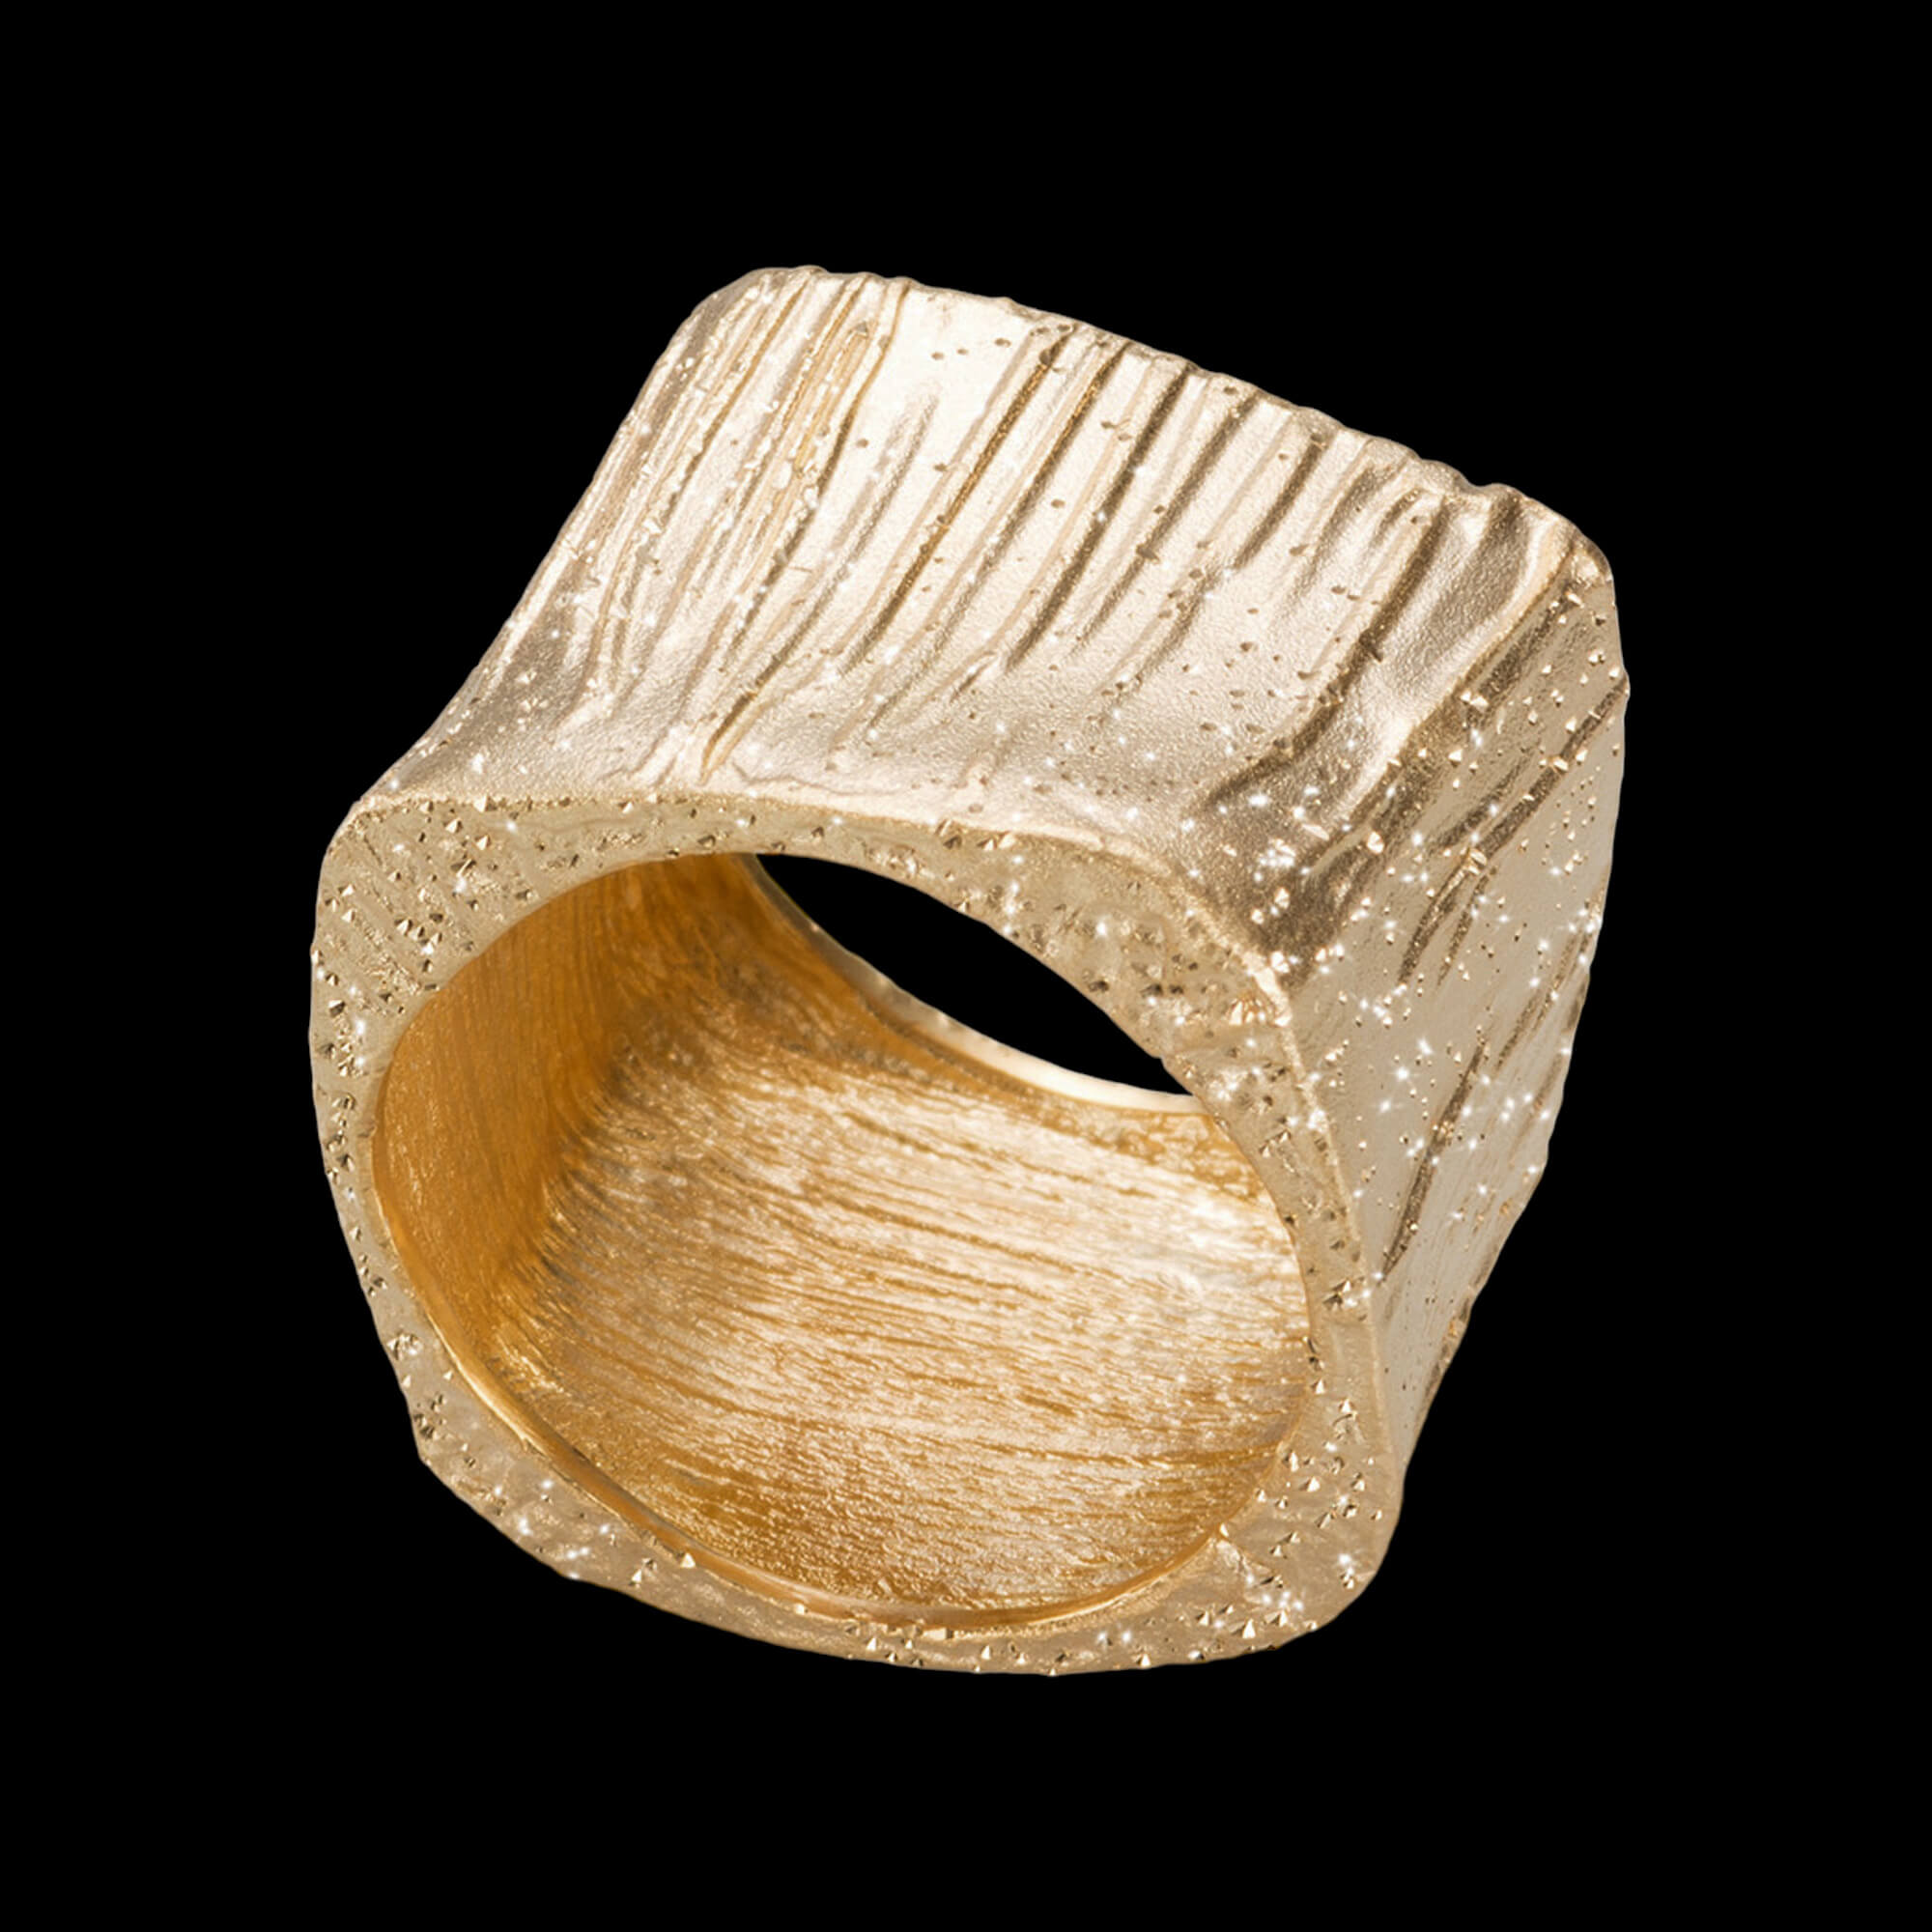 Gilt ring square -shaped and diamond